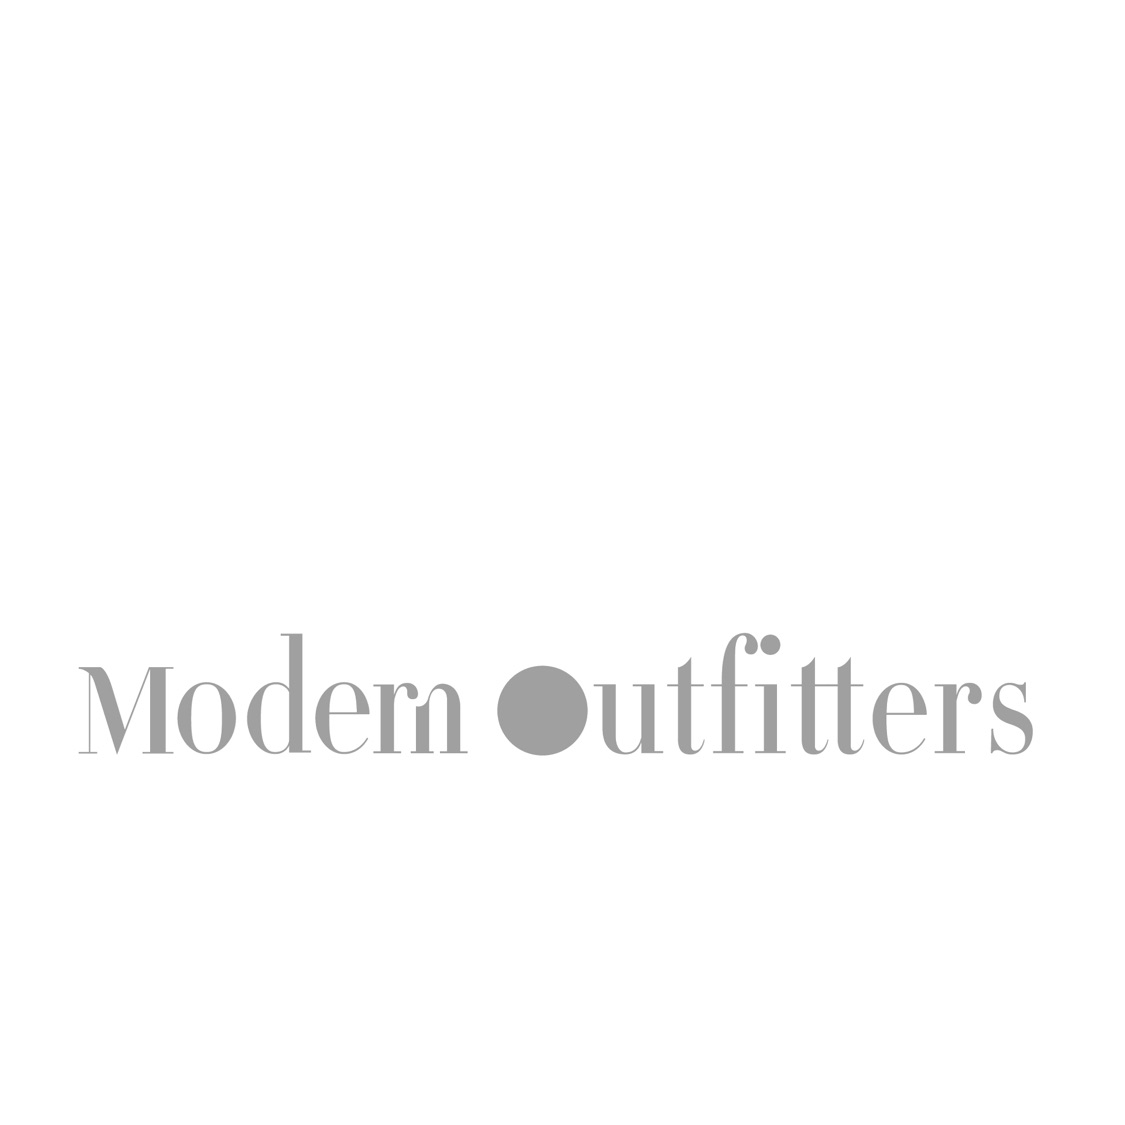 MODERN OUTFITTERS服装集成店